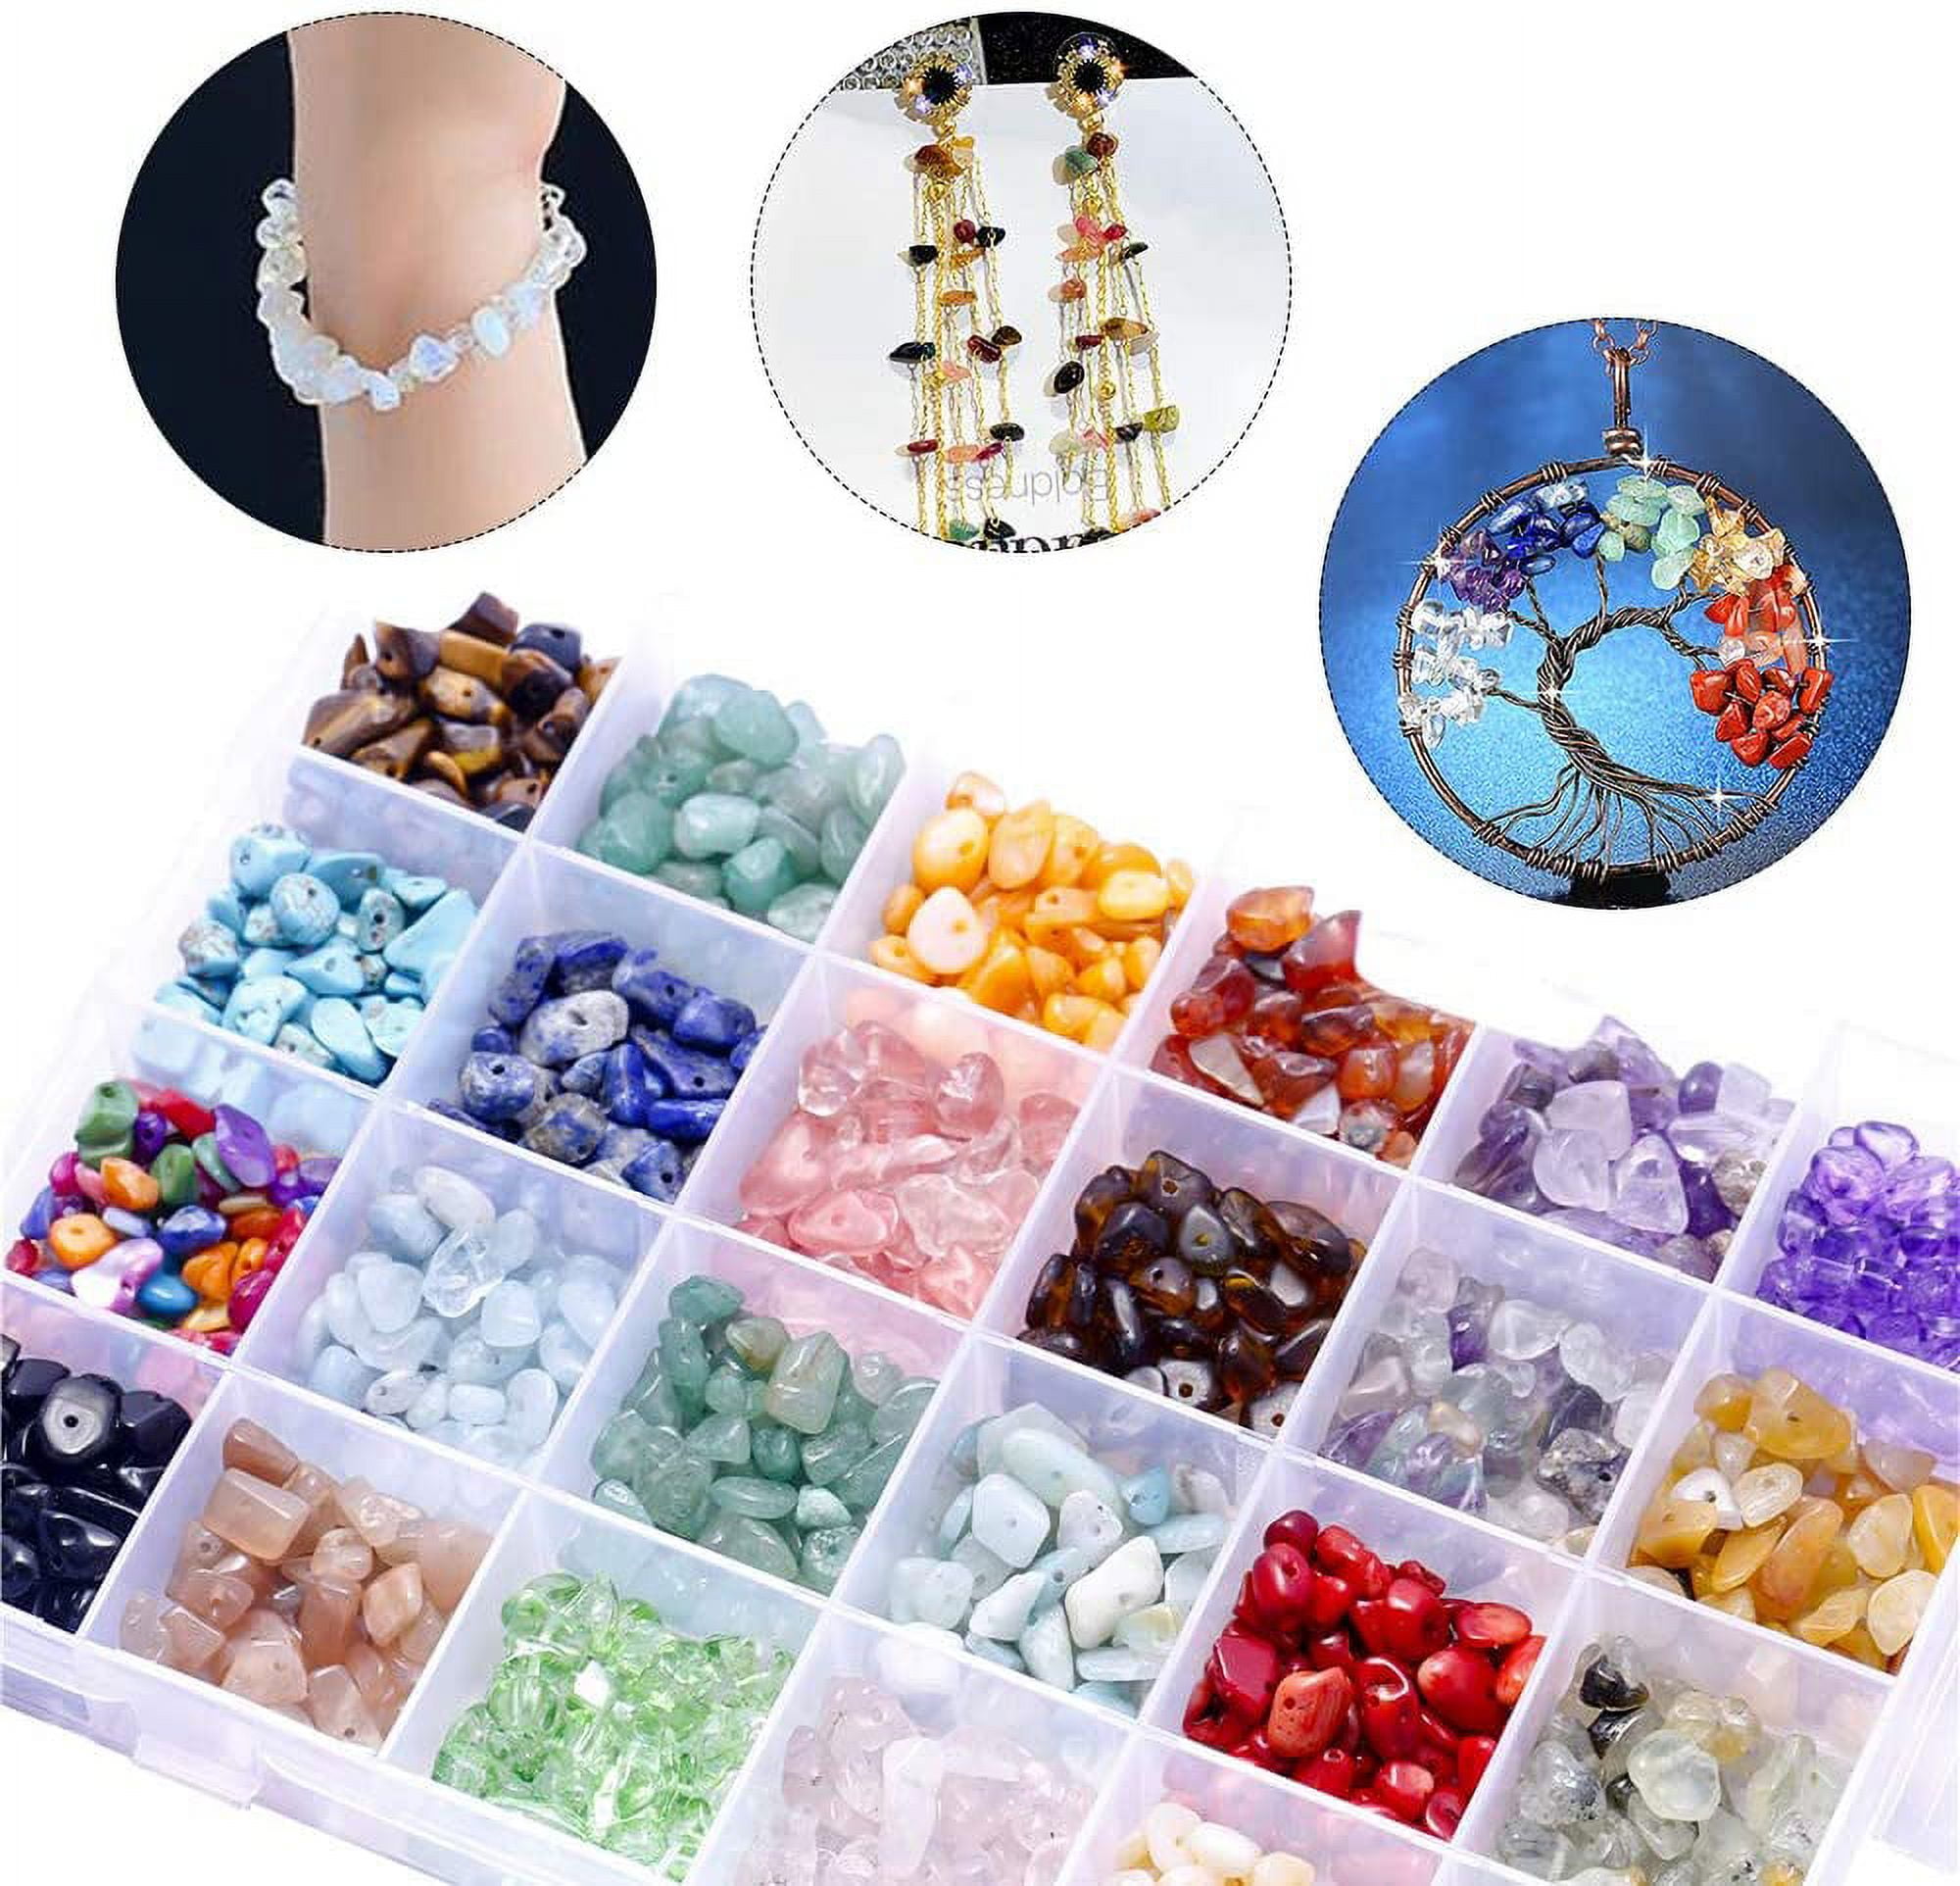 Gacuyi 6000 pcs Earring Making Kit, Irregular Crystal Chips Beads for  Necklace Earring Jewelry Making Supplies and Repair with